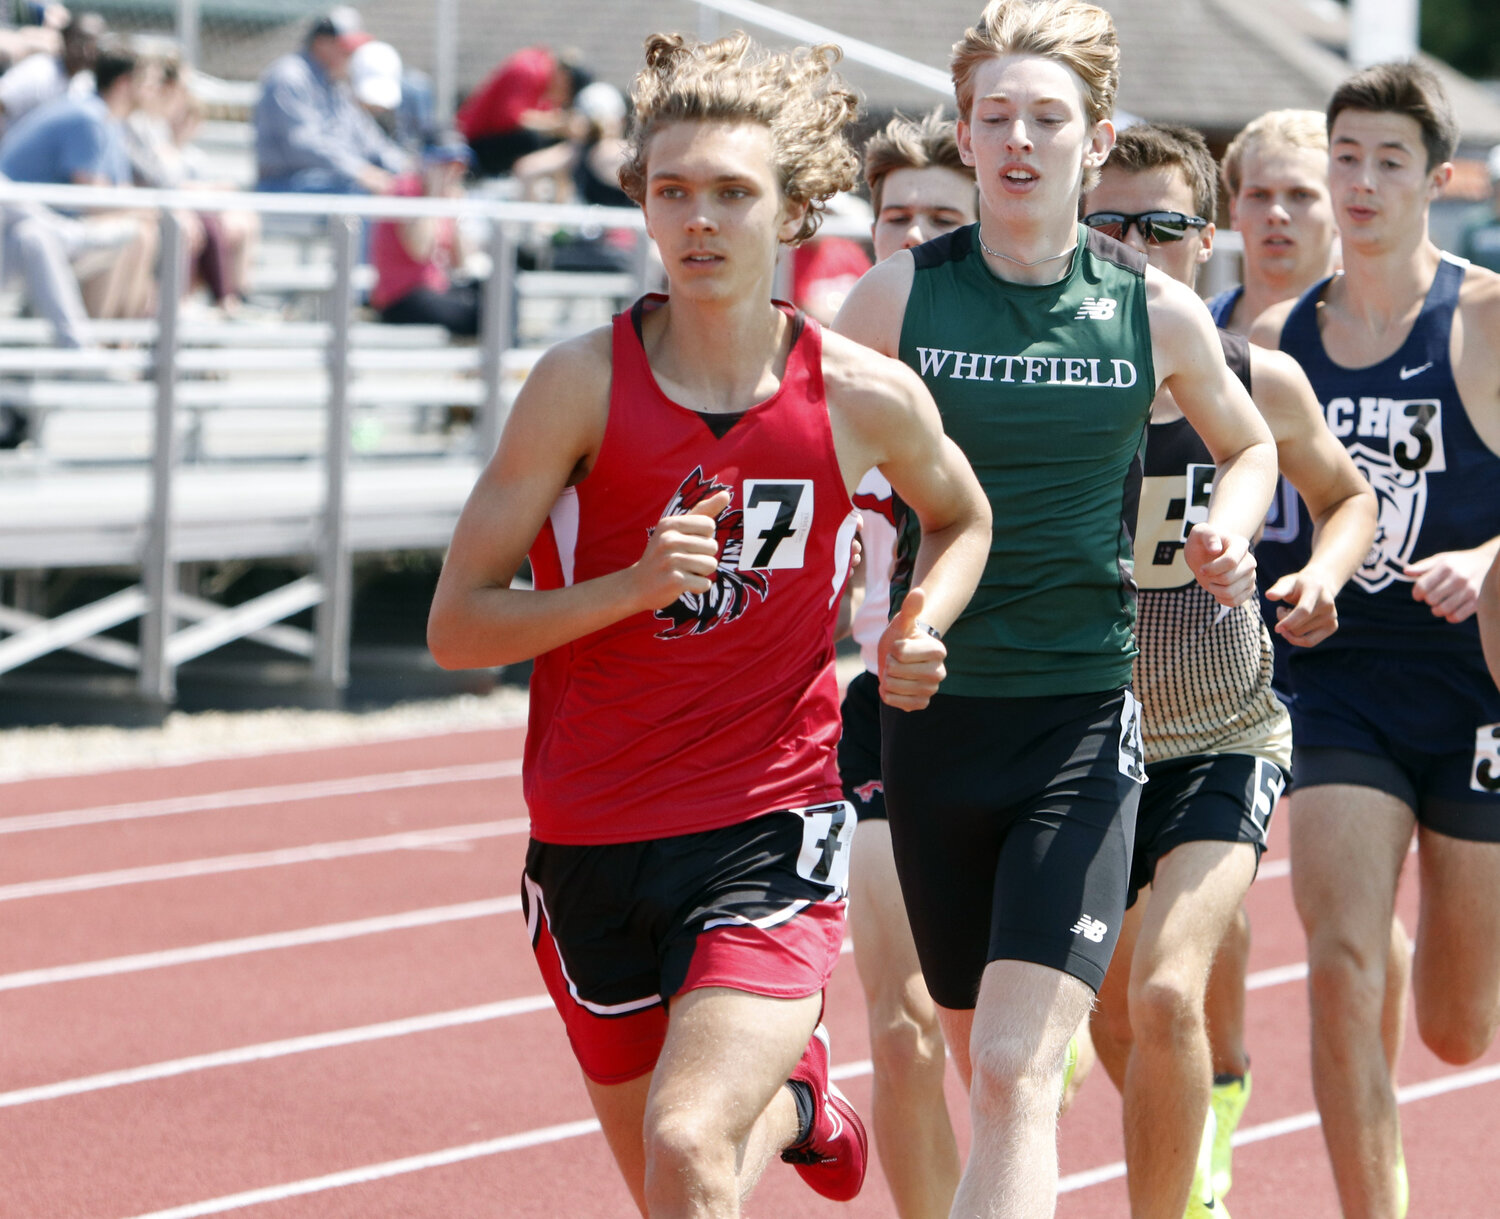 Wyatt Claiborne leads a group of runners during the 1600-meter run.